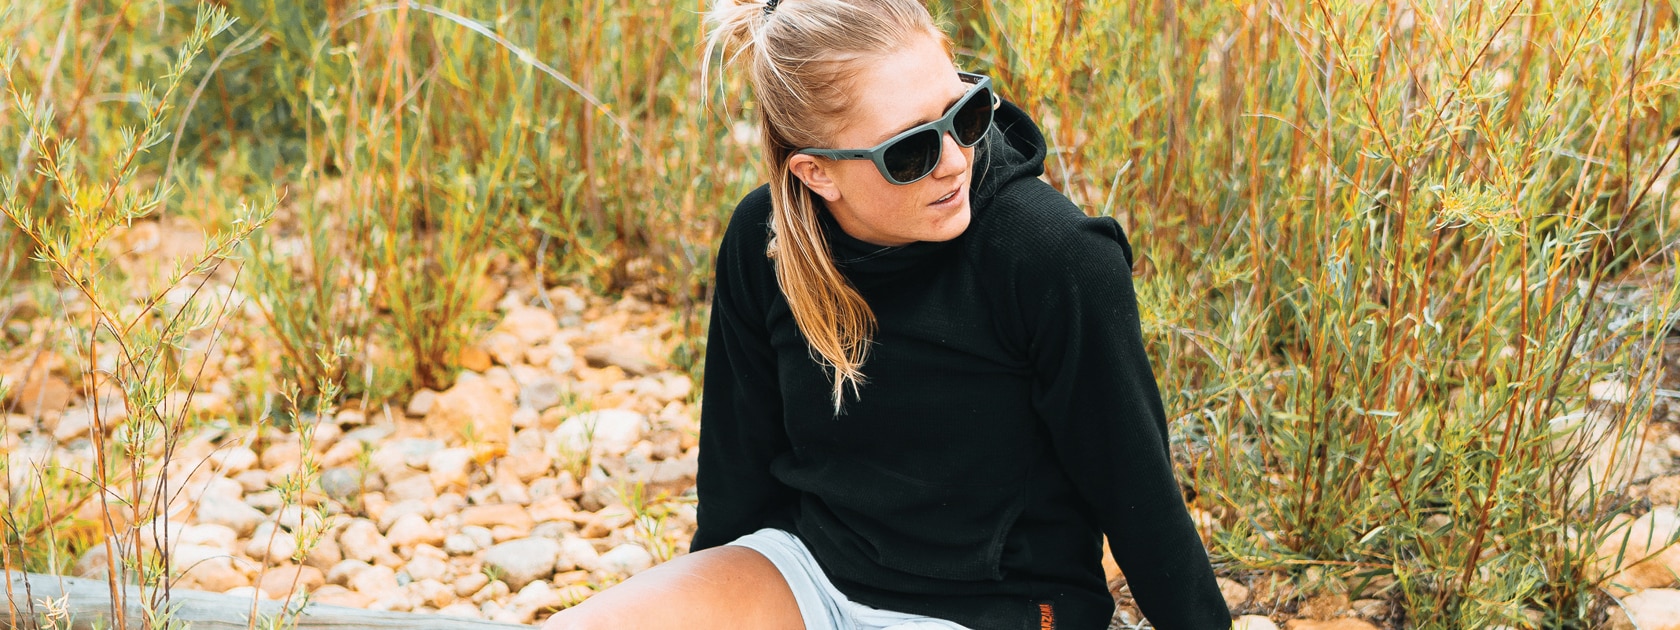 woman in a black hoodie and sunglasses sits near tall grass